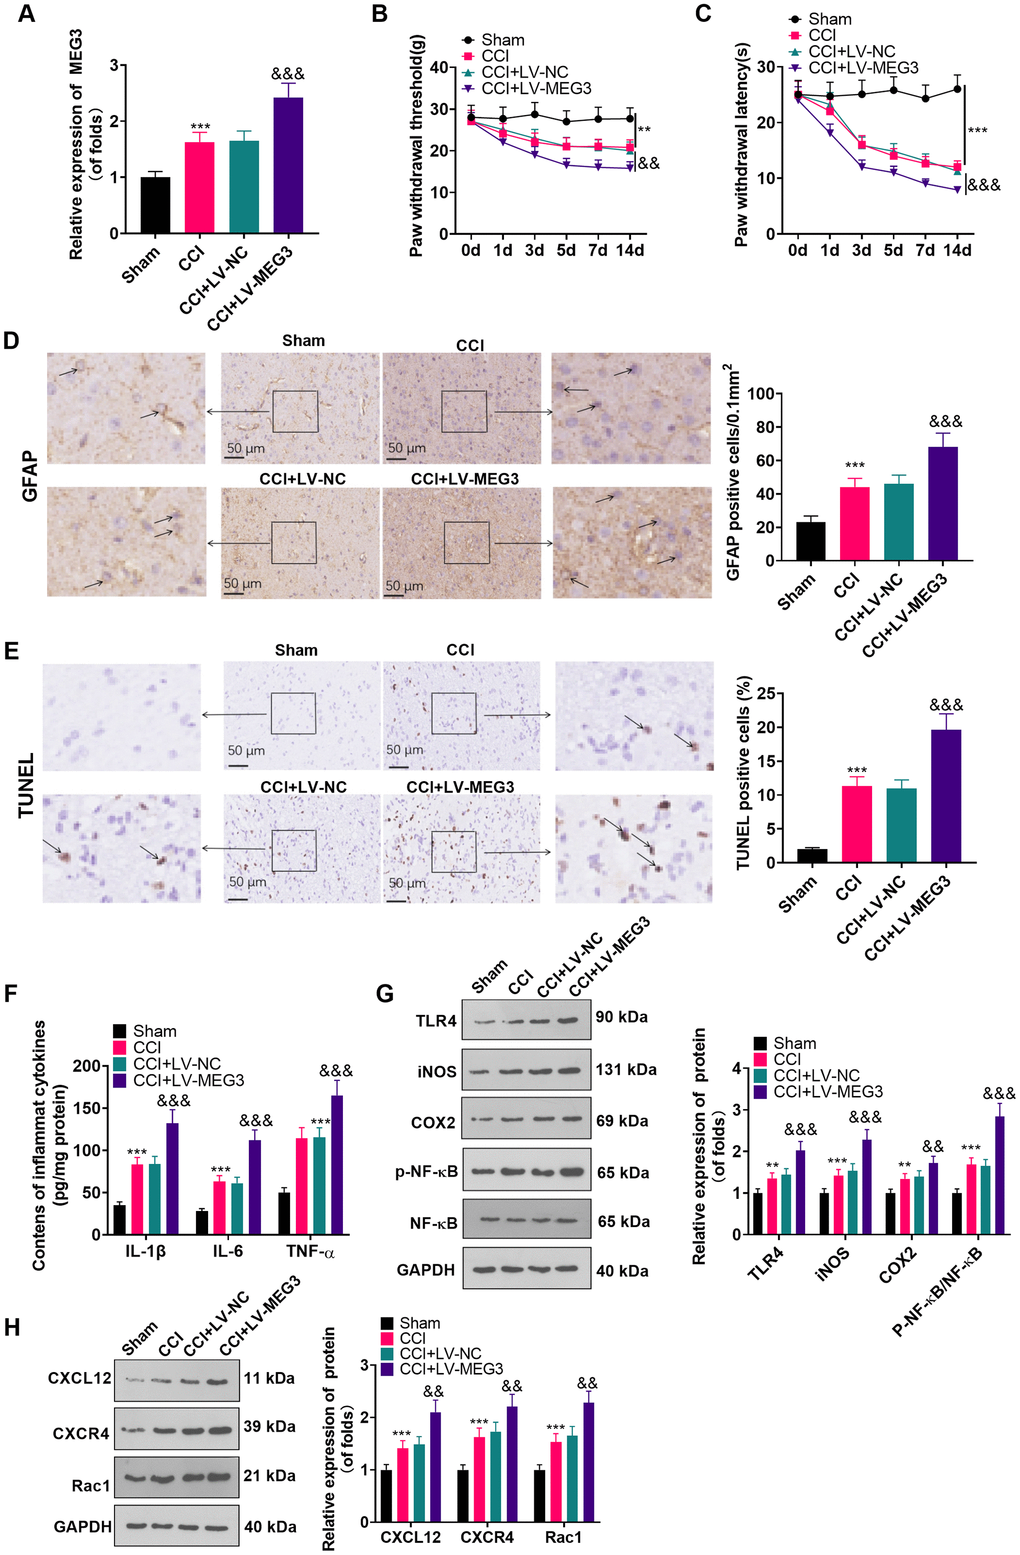 Up-regulation of MEG3 promoted NP and inflammatory response. (A) After LV-MEG3 transfection, the level of MEG3 in CCI rats was examined by RT-qPCR. (B) PWT was adopted to assess the impact of MEG3 on mechanical hyperalgesia. (C) PWL was utilized to evaluate the influence of MEG3 on thermal hyperalgesia. (D) The proportion of GFAP-positive cells in CCI rats was determined by IHC; Scale bar=50 μm. (E) TUNEL staining was applied to detect the influence of MEG3 on neuronal cell apoptosis in the L4-L6 dorsal spinal cord of CCI rats; Scale bar=50 μm. (F) Levels of TNF-α, IL-6 and IL-1β in CCI rats after up-regulating MEG3 were examined by ELISA. (G, H) The contents of TLR4, COX2, iNOS, NF-κB, CXCL12, CXCR4, and Rac1 in dorsal spinal cord tissues of CCI rats after up-regulating MEG3 were monitored by WB. Data were expressed as mean±SD. n=5. ***PPPP